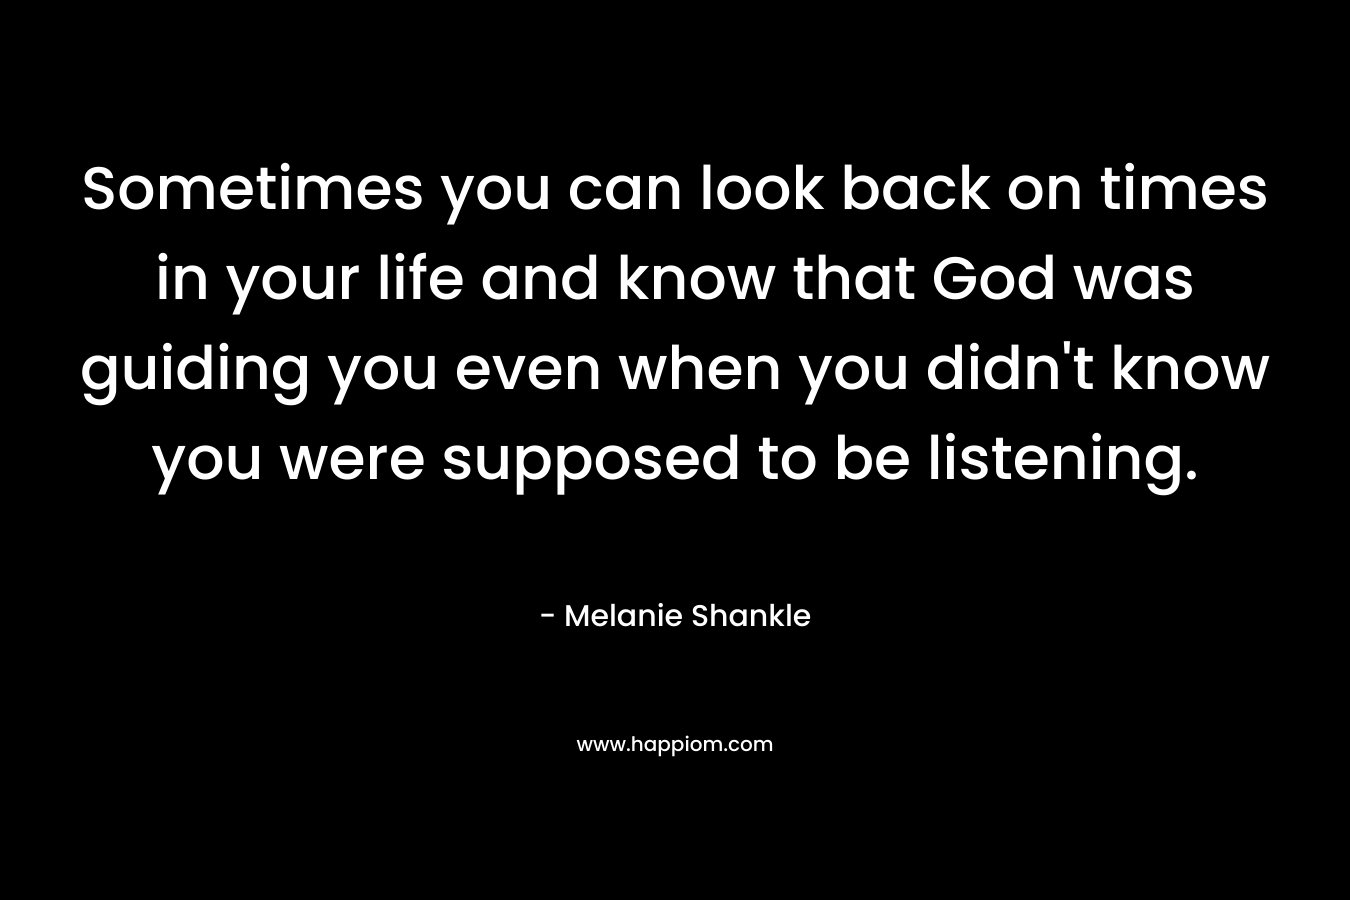 Sometimes you can look back on times in your life and know that God was guiding you even when you didn't know you were supposed to be listening.